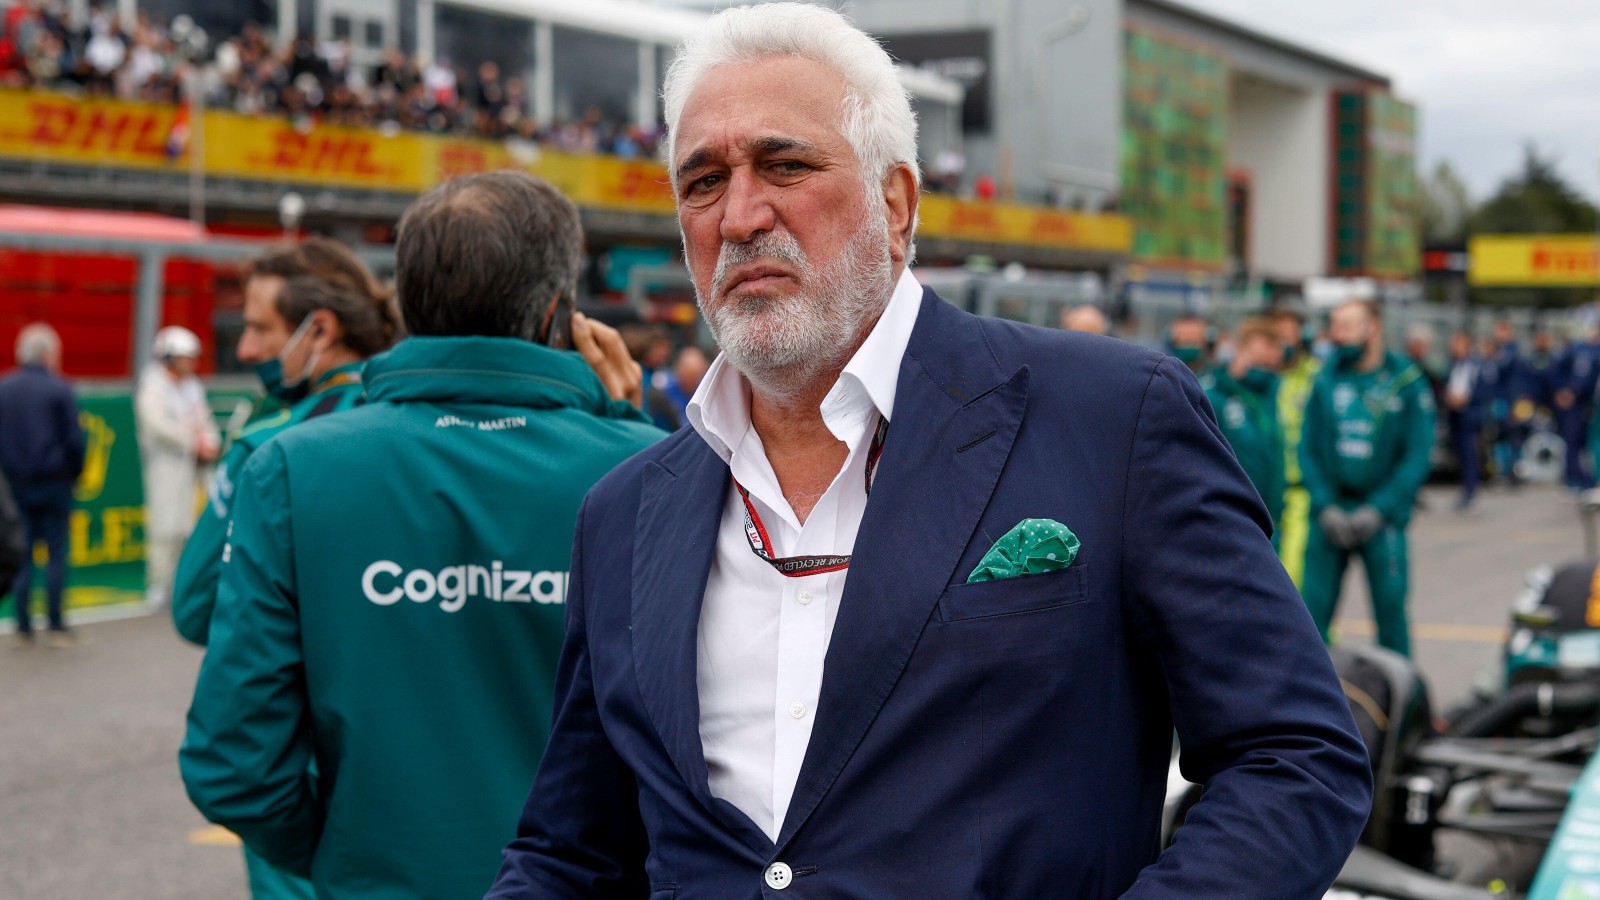 Aston Martin team owner Lawrence Stroll looks into the camera. Italy, April 2022.